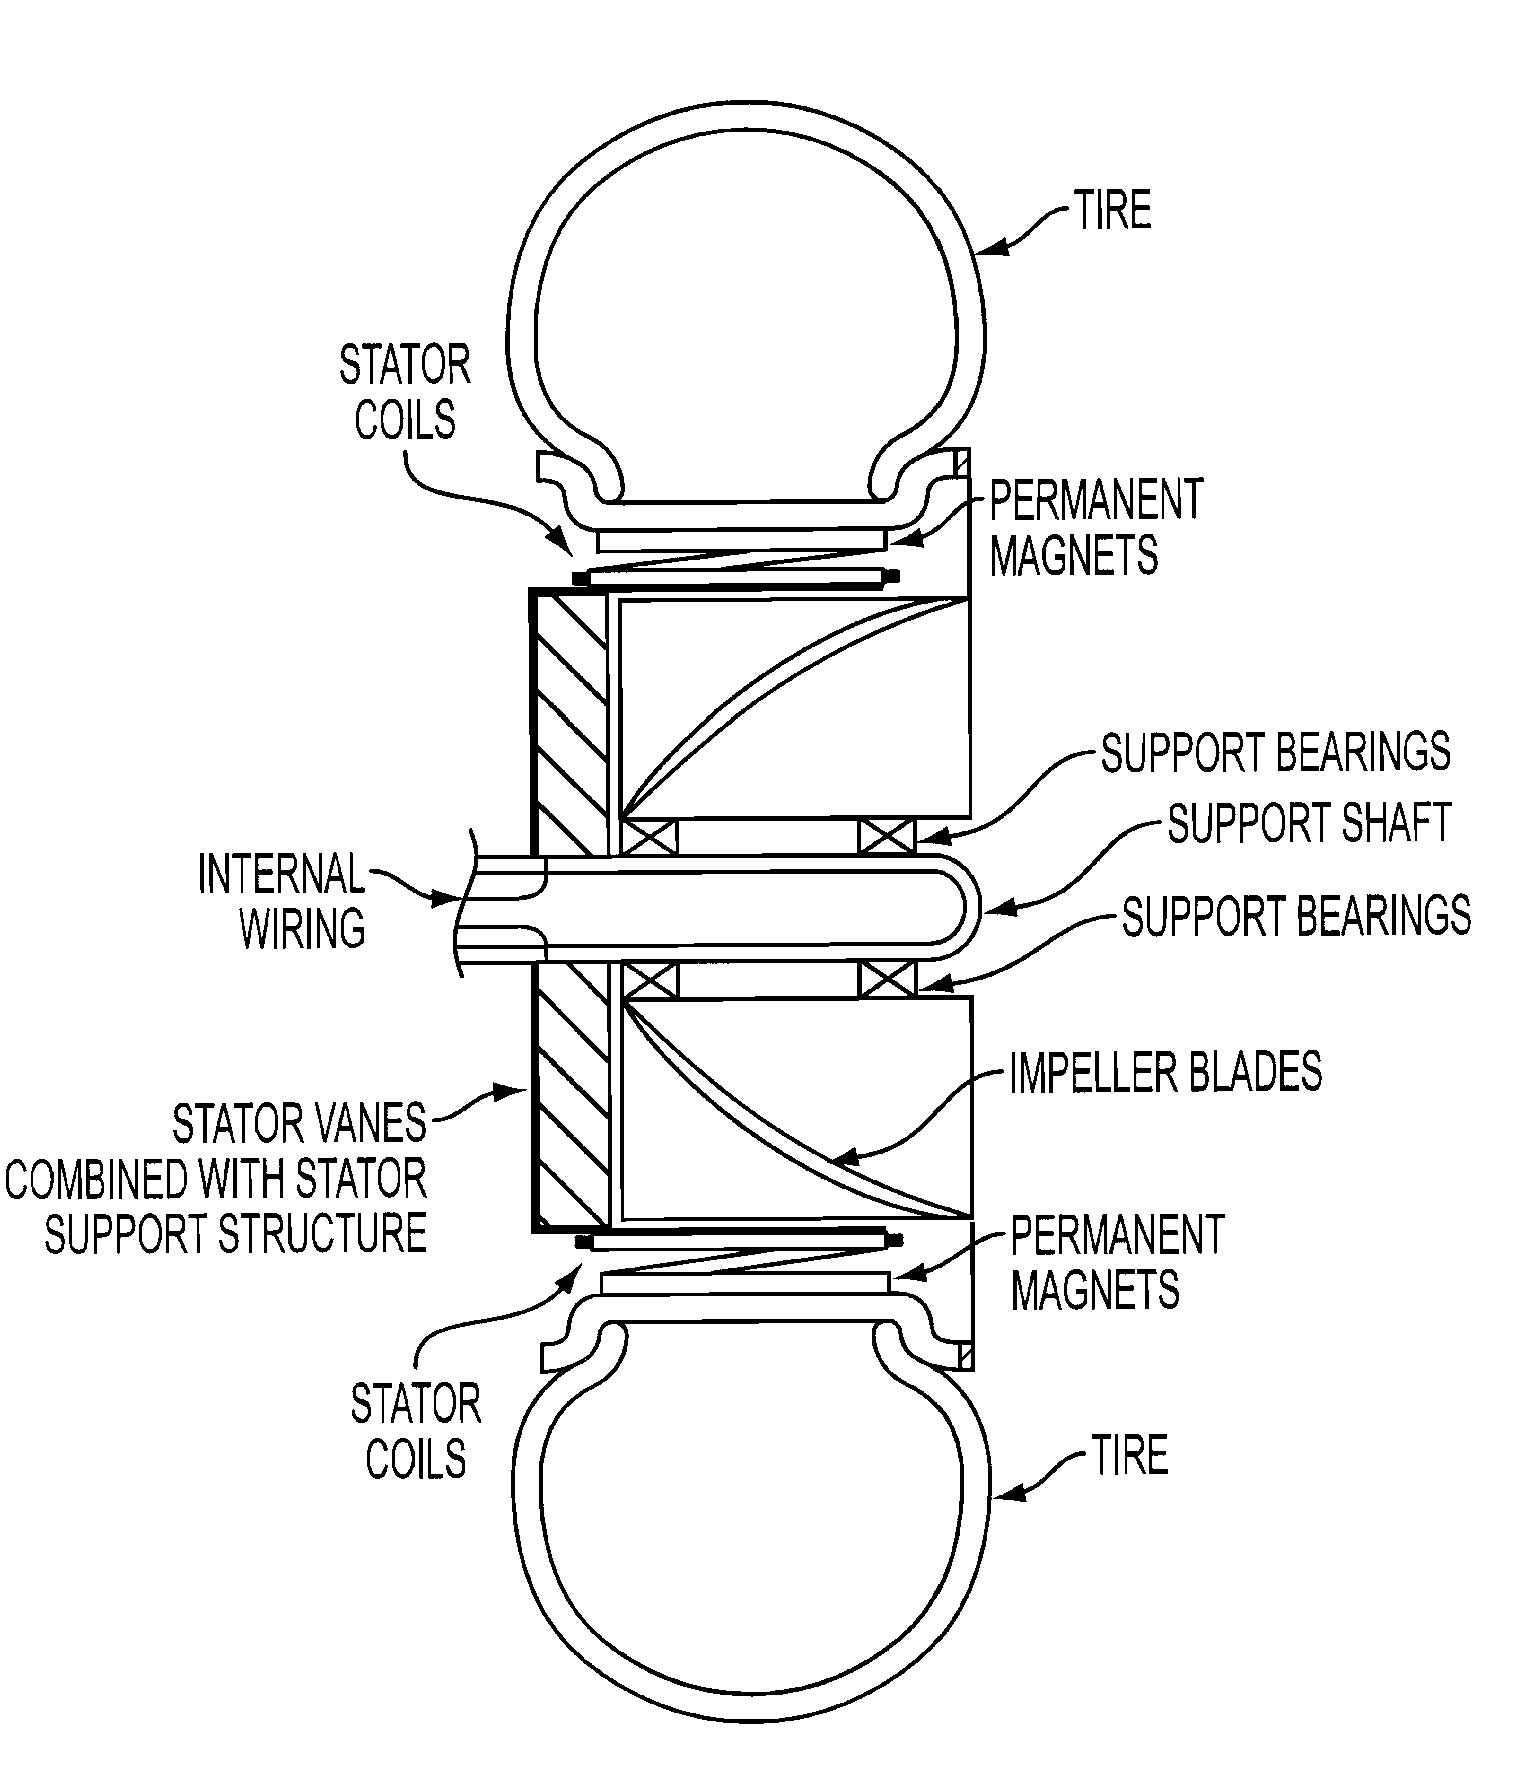 Method and apparatus for powering of amphibious craft